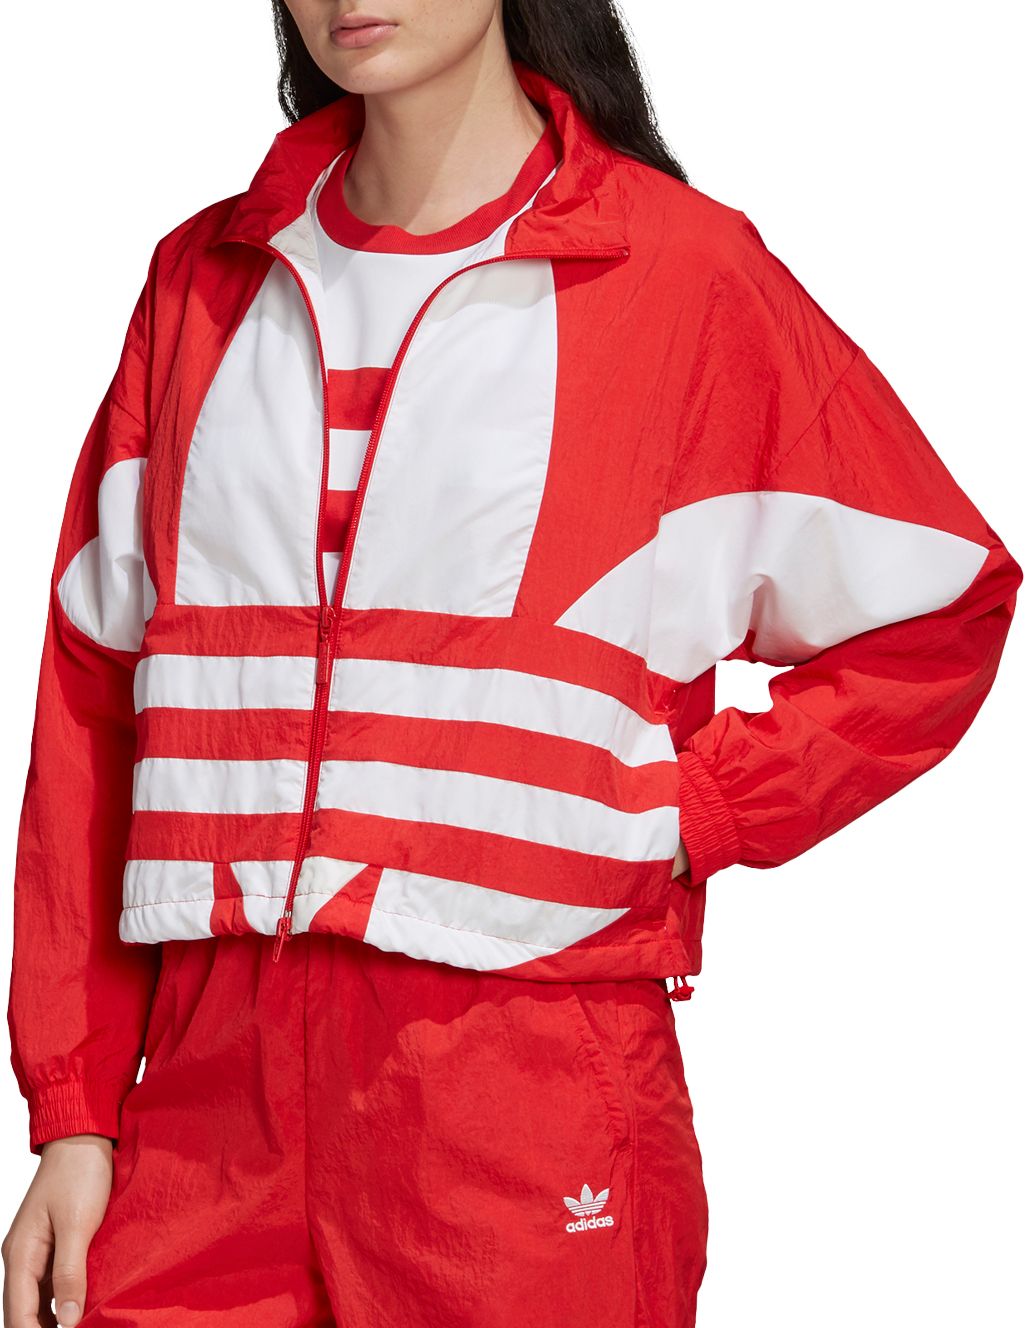 red adidas suit womens